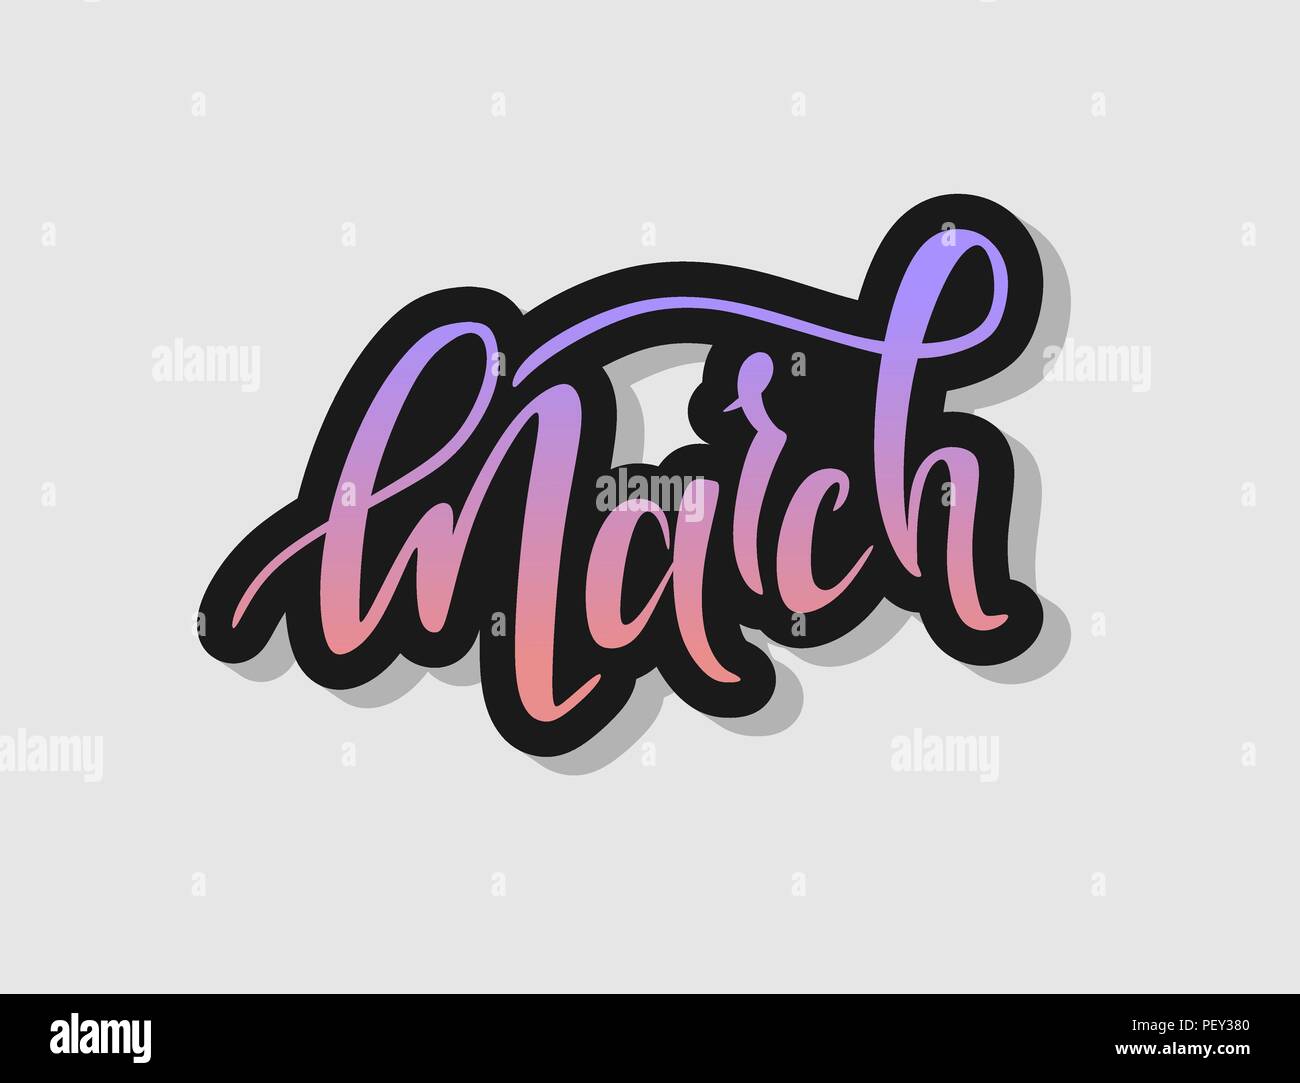 march hand lettering sign new year month logo ombre lettering decorative typography gradient calligraphy Stock Photo